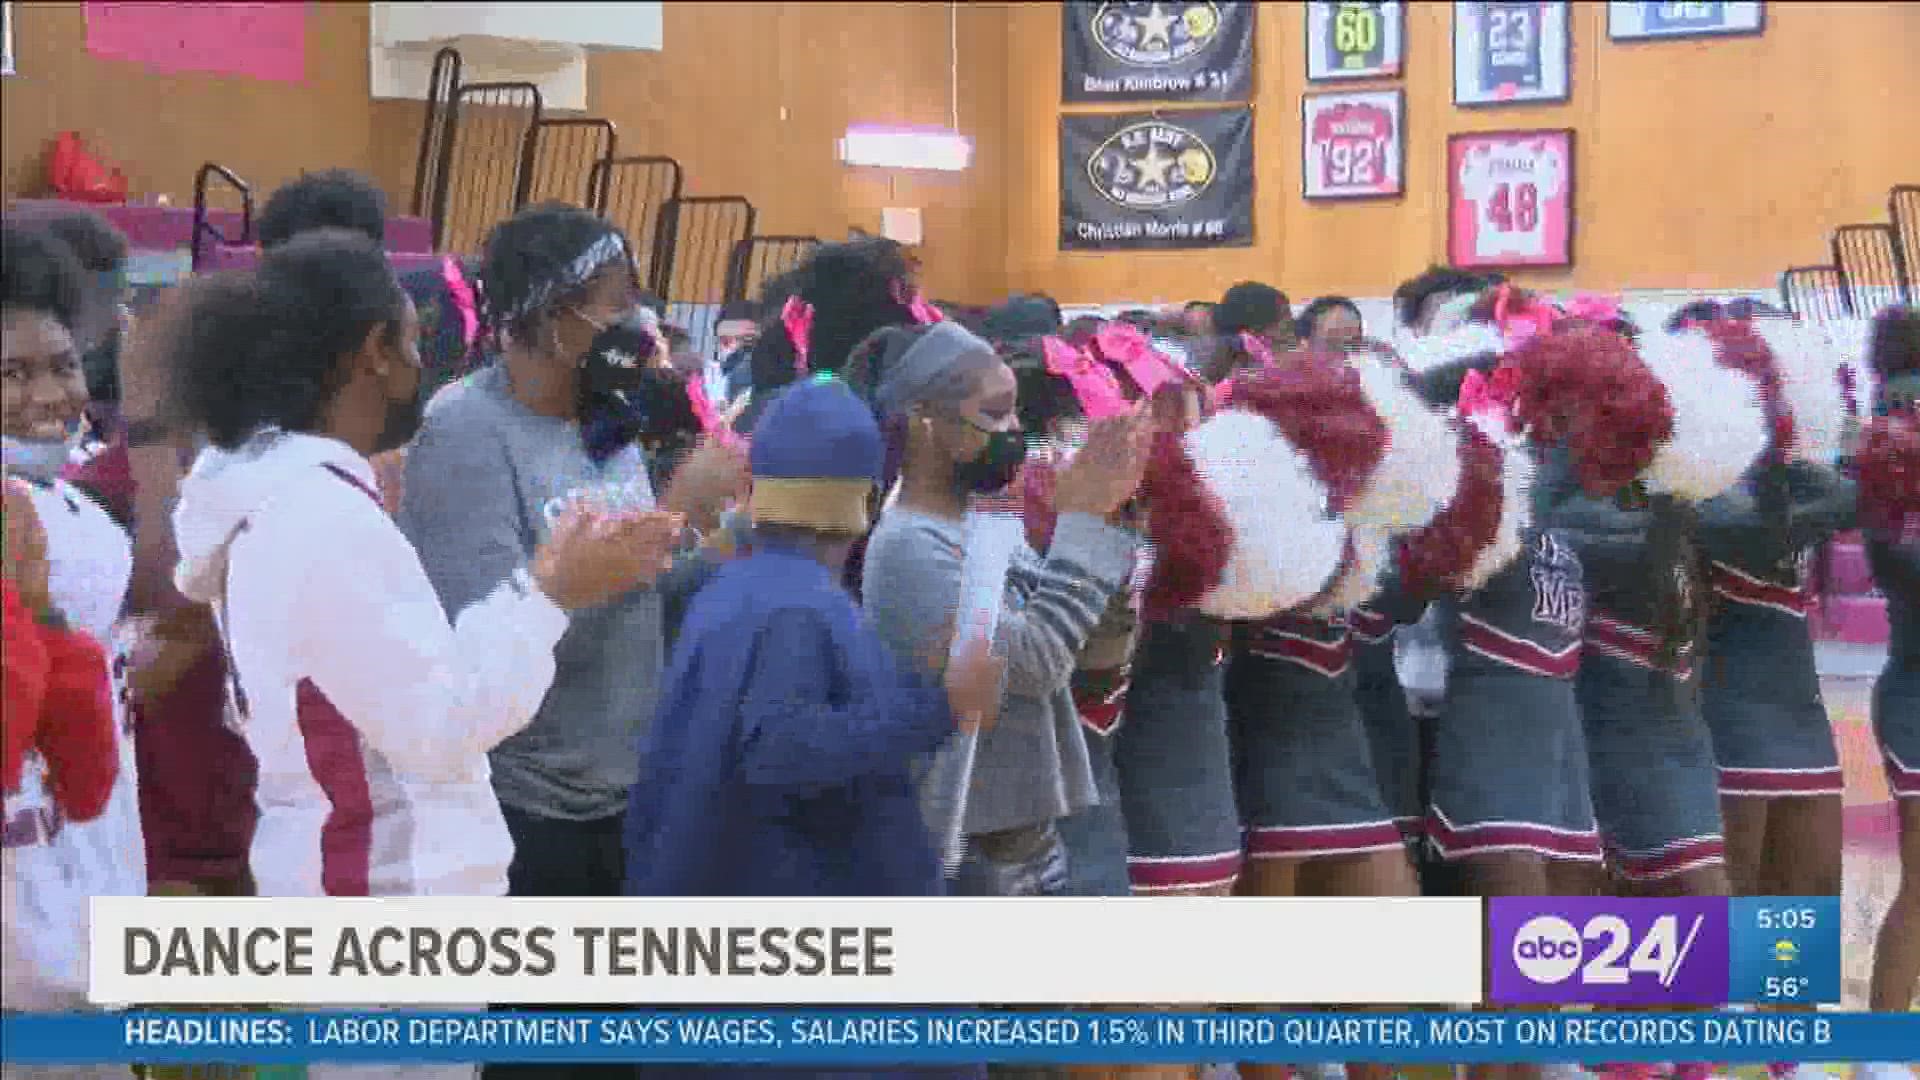 It's Tennessee Child Health Month, and Friday, students and organizers cut a rug for the Dance Across Tennessee event.